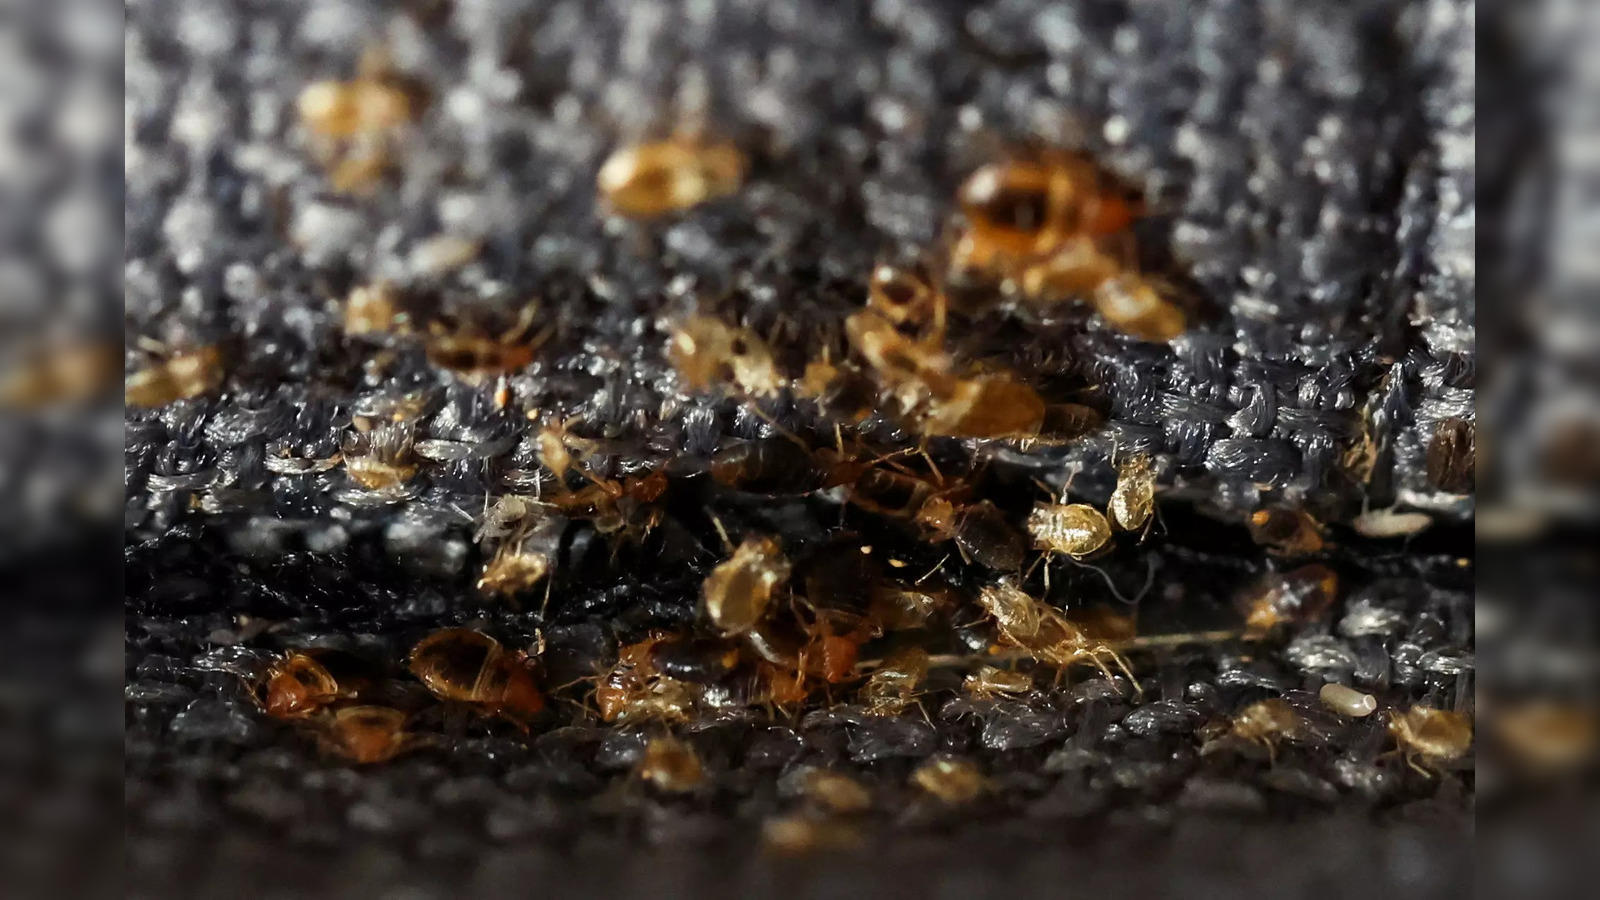 The Bedbugs in Paris: Here's What We Know So Far